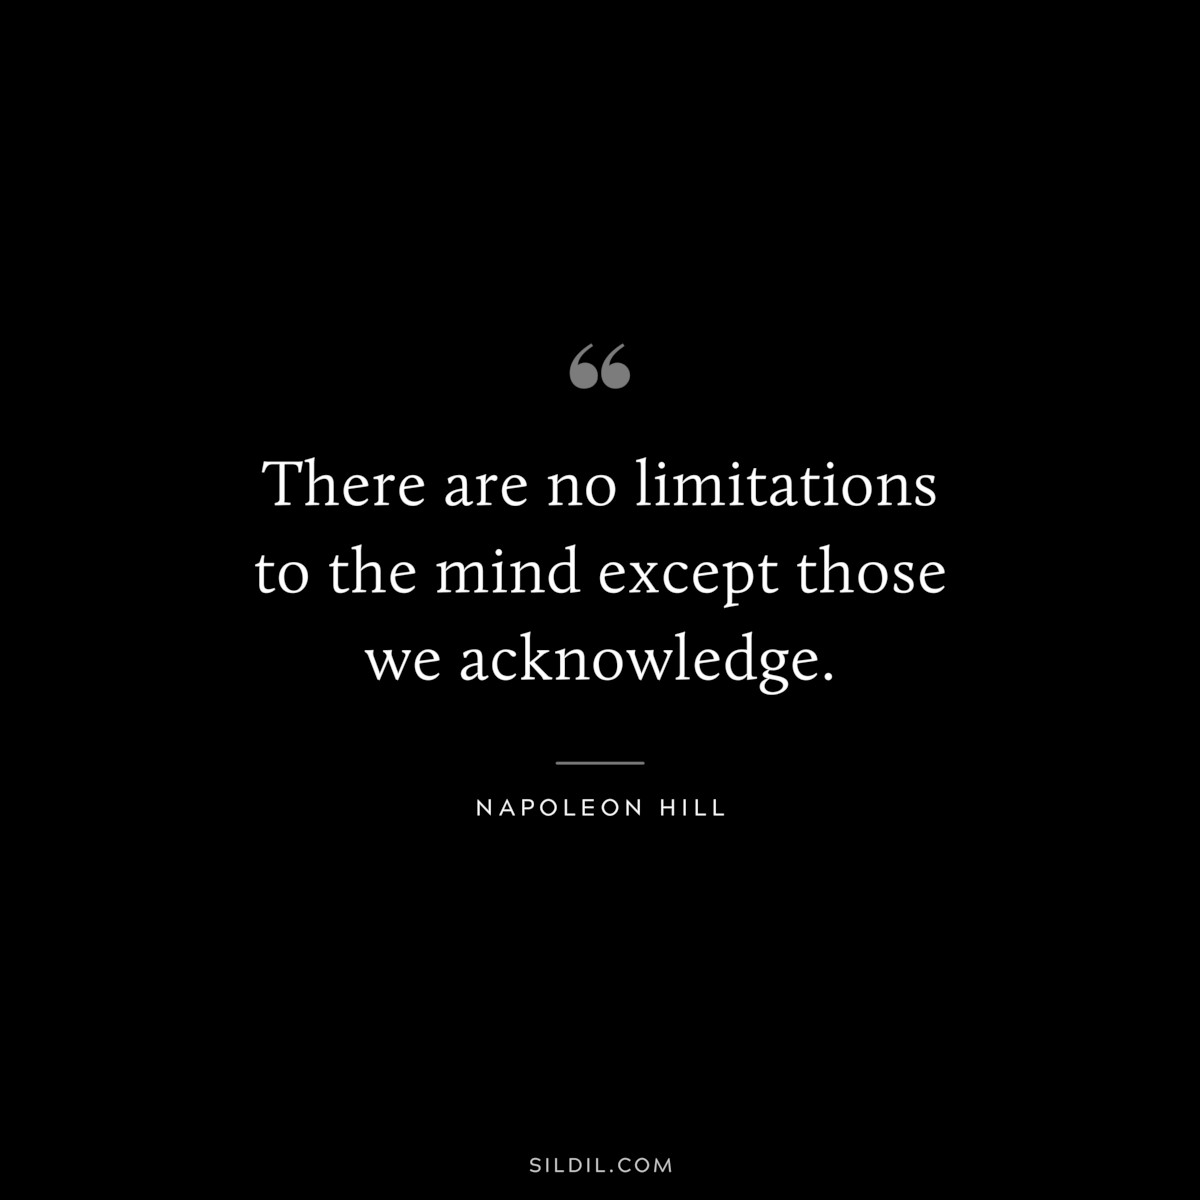 There are no limitations to the mind except those we acknowledge. ― Napoleon Hill